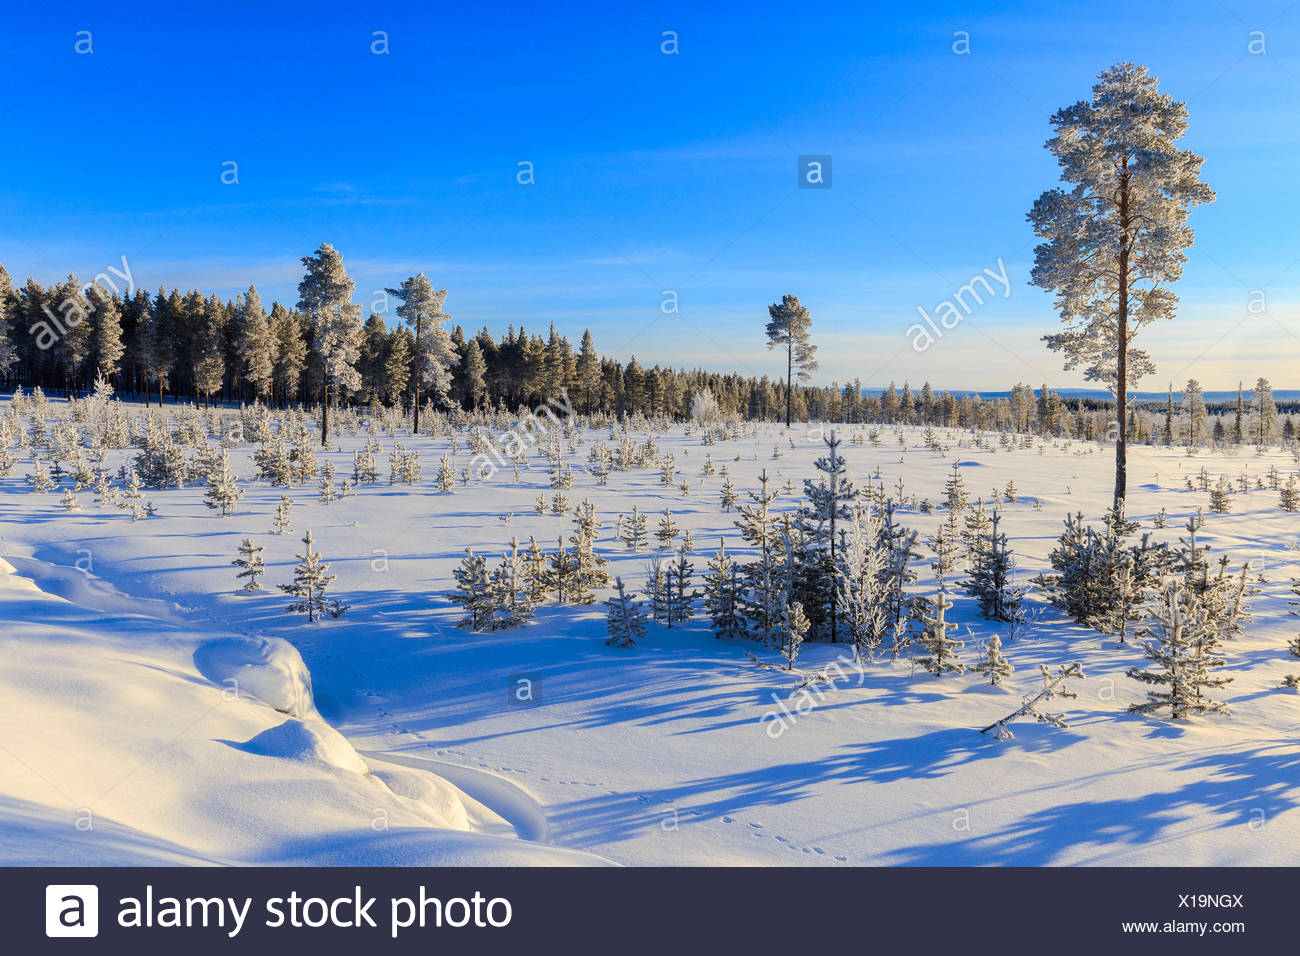 Snow Covered Taiga Stock Photos And Snow Covered Taiga Stock Images Alamy